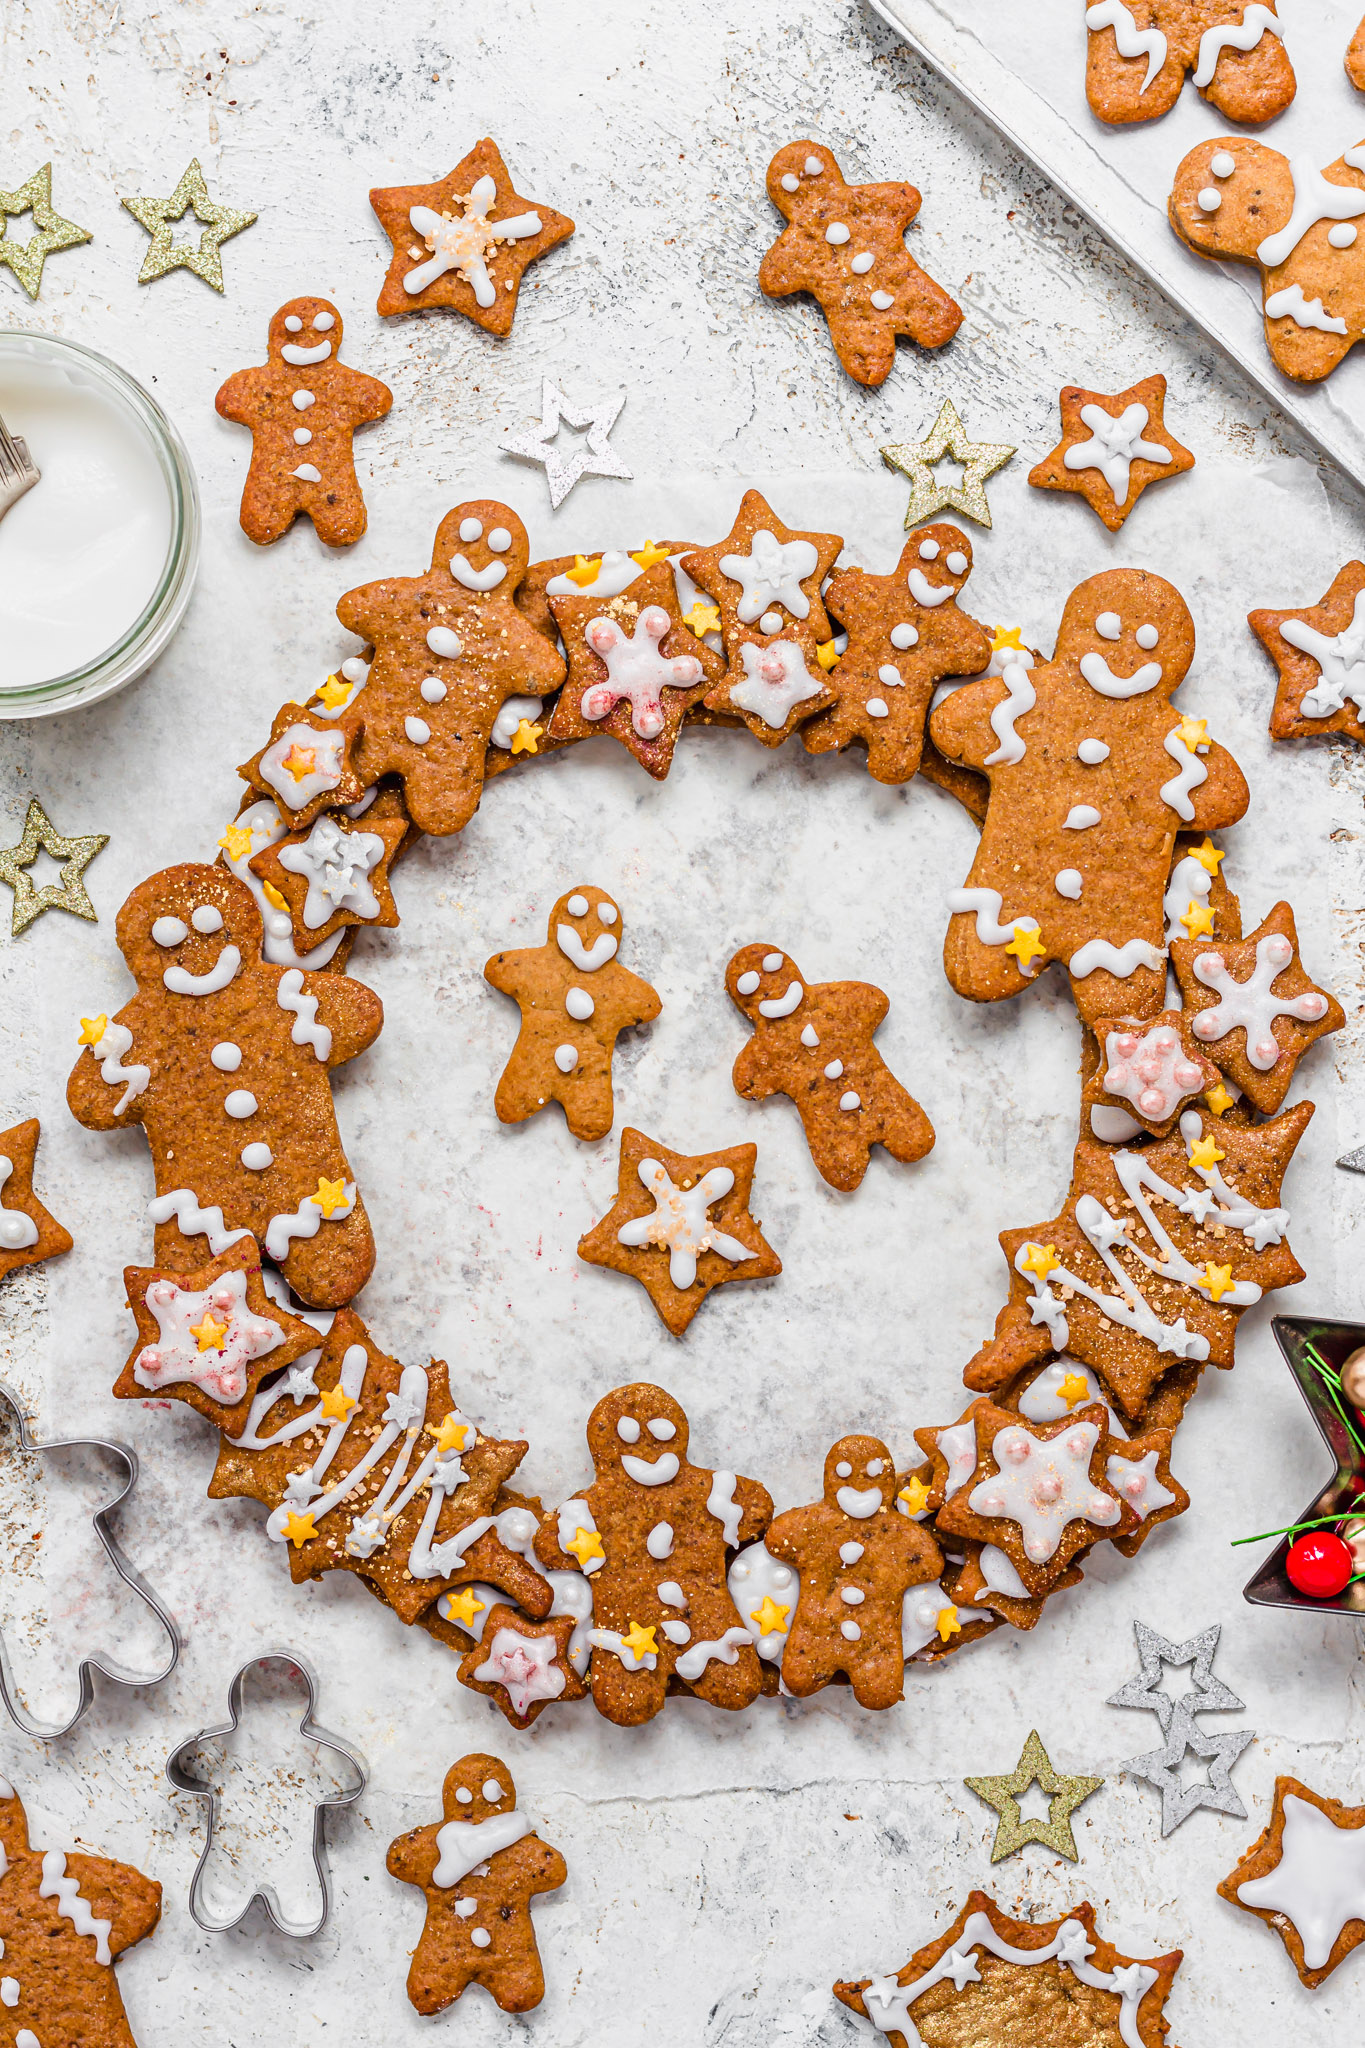 Vegan Gingerbread Wreath and Shapes